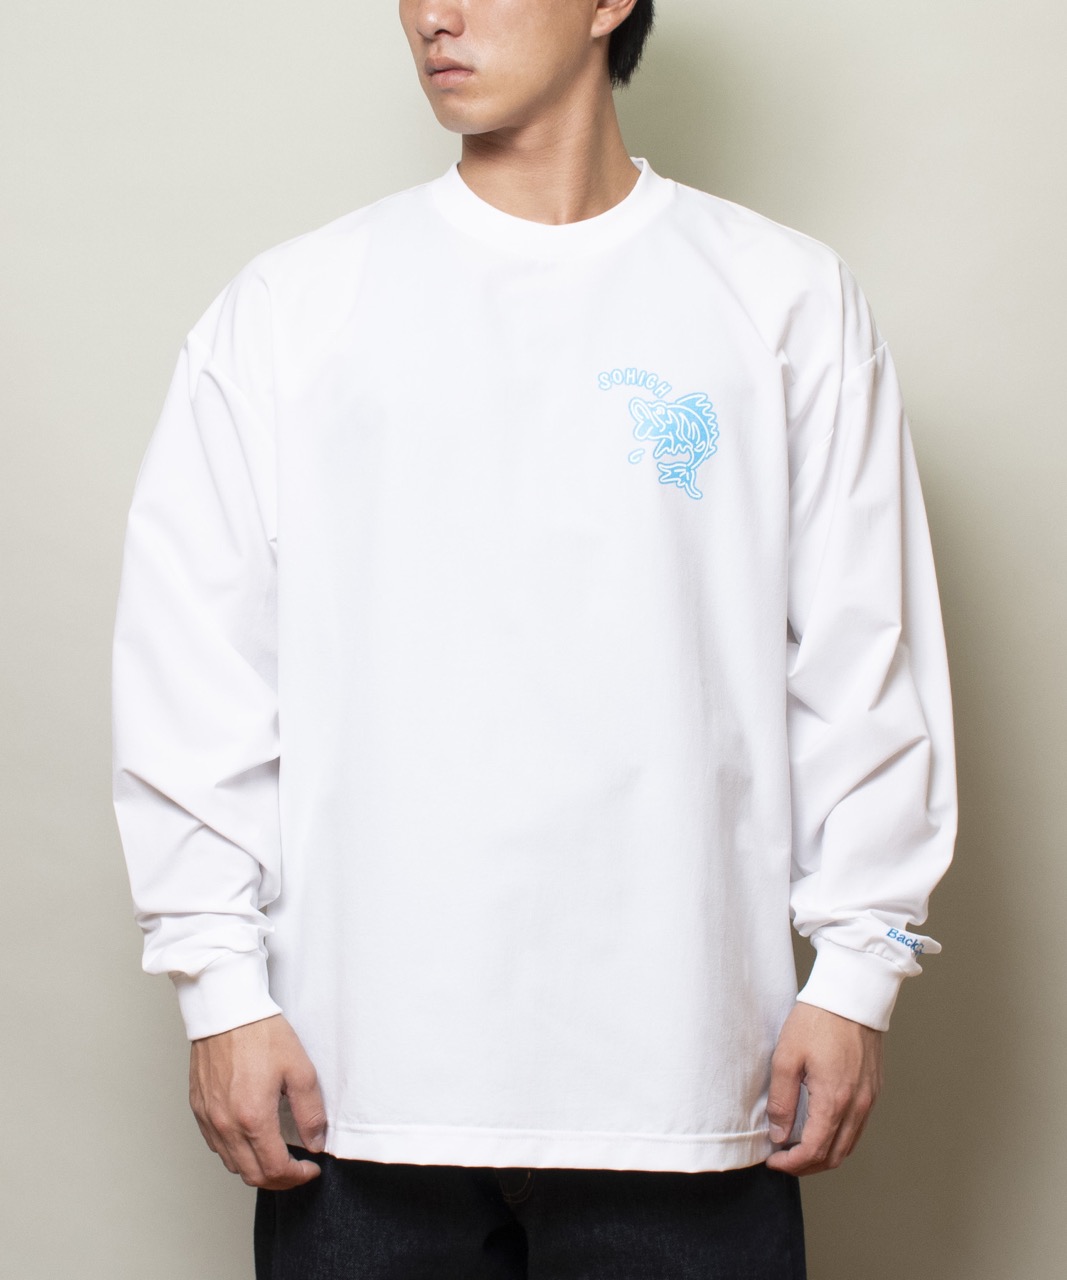 Back Channel FISHING STRETCH L/S TEE (WHITE) 2323258 公式通販